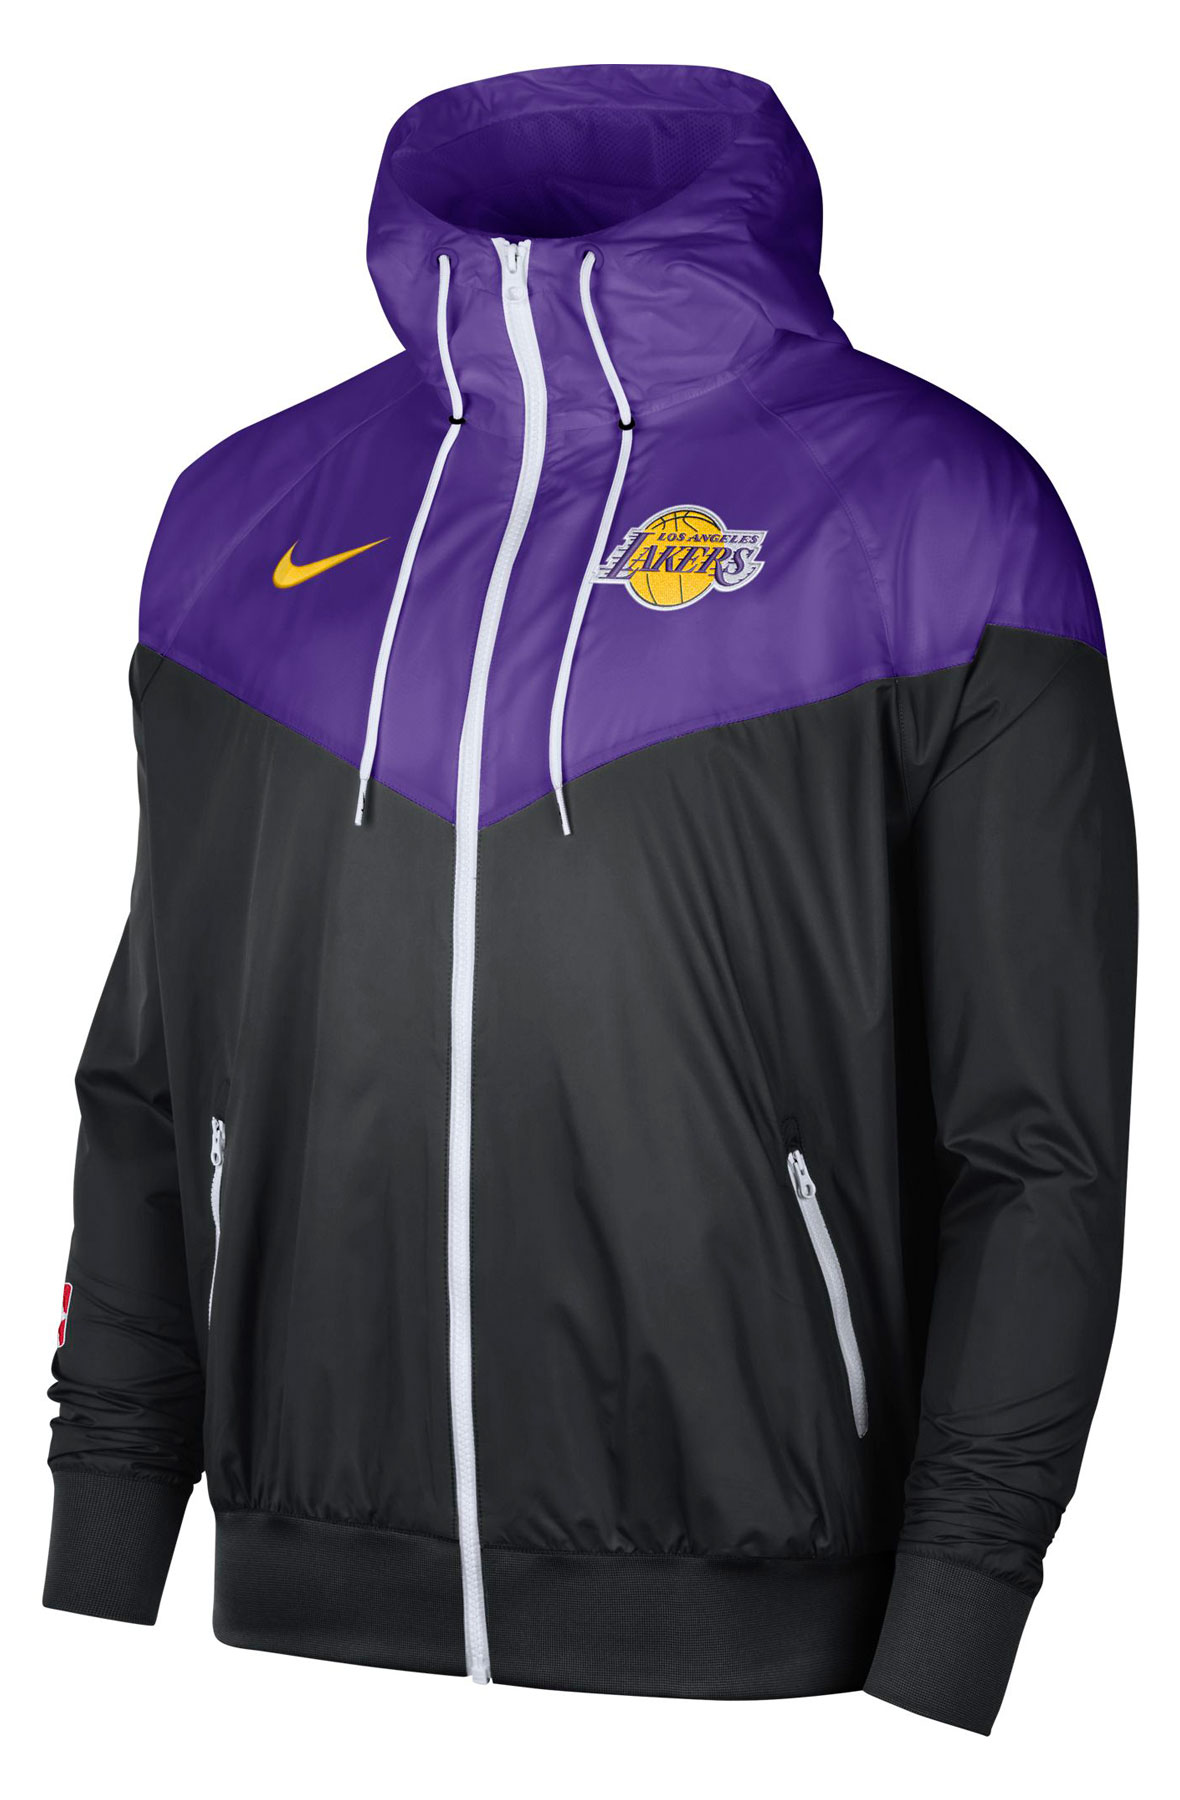 LOS ANGELES LAKERS COURTSIDE LIGHTWEIGHT WINDRUNNER JACKET DB1247 504